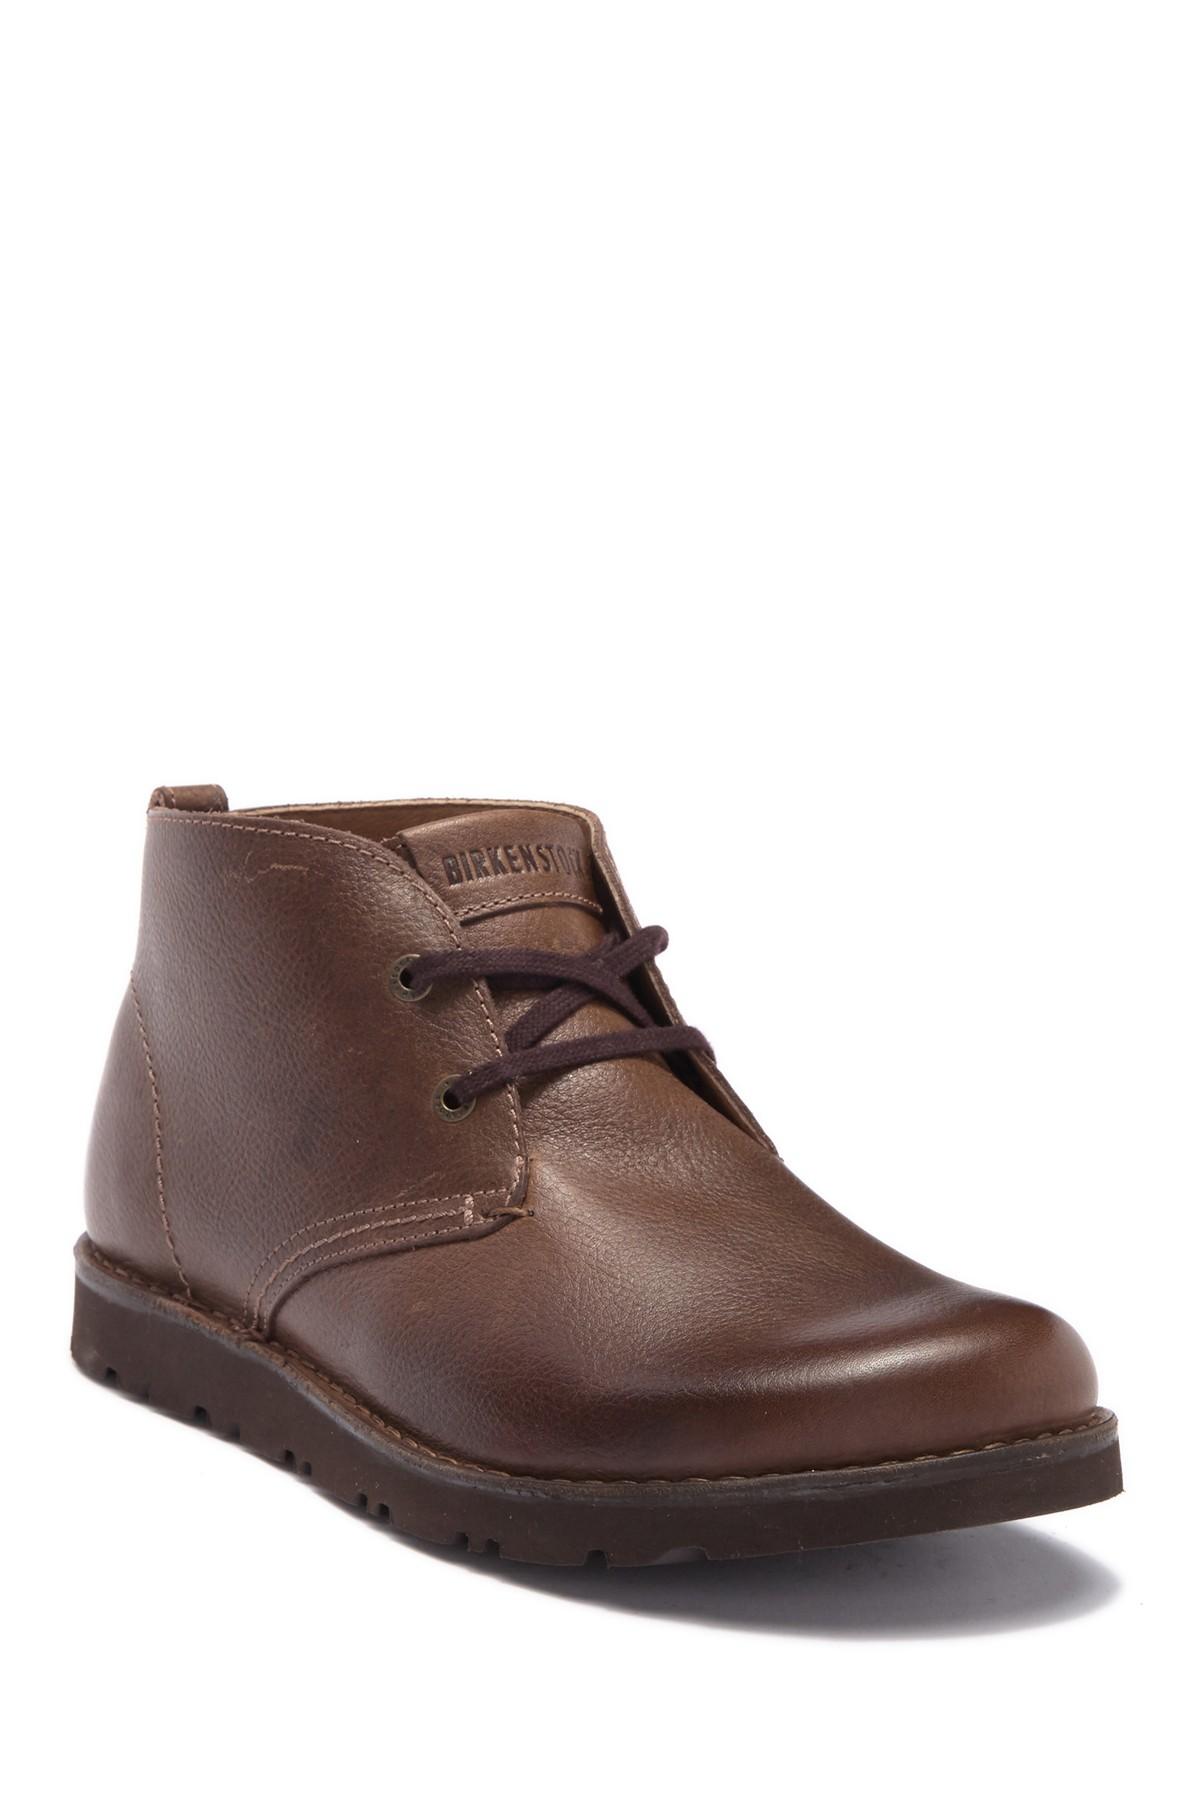 Birkenstock Harris Leather Chukka Boot - Discontinued in Brown for Men ...